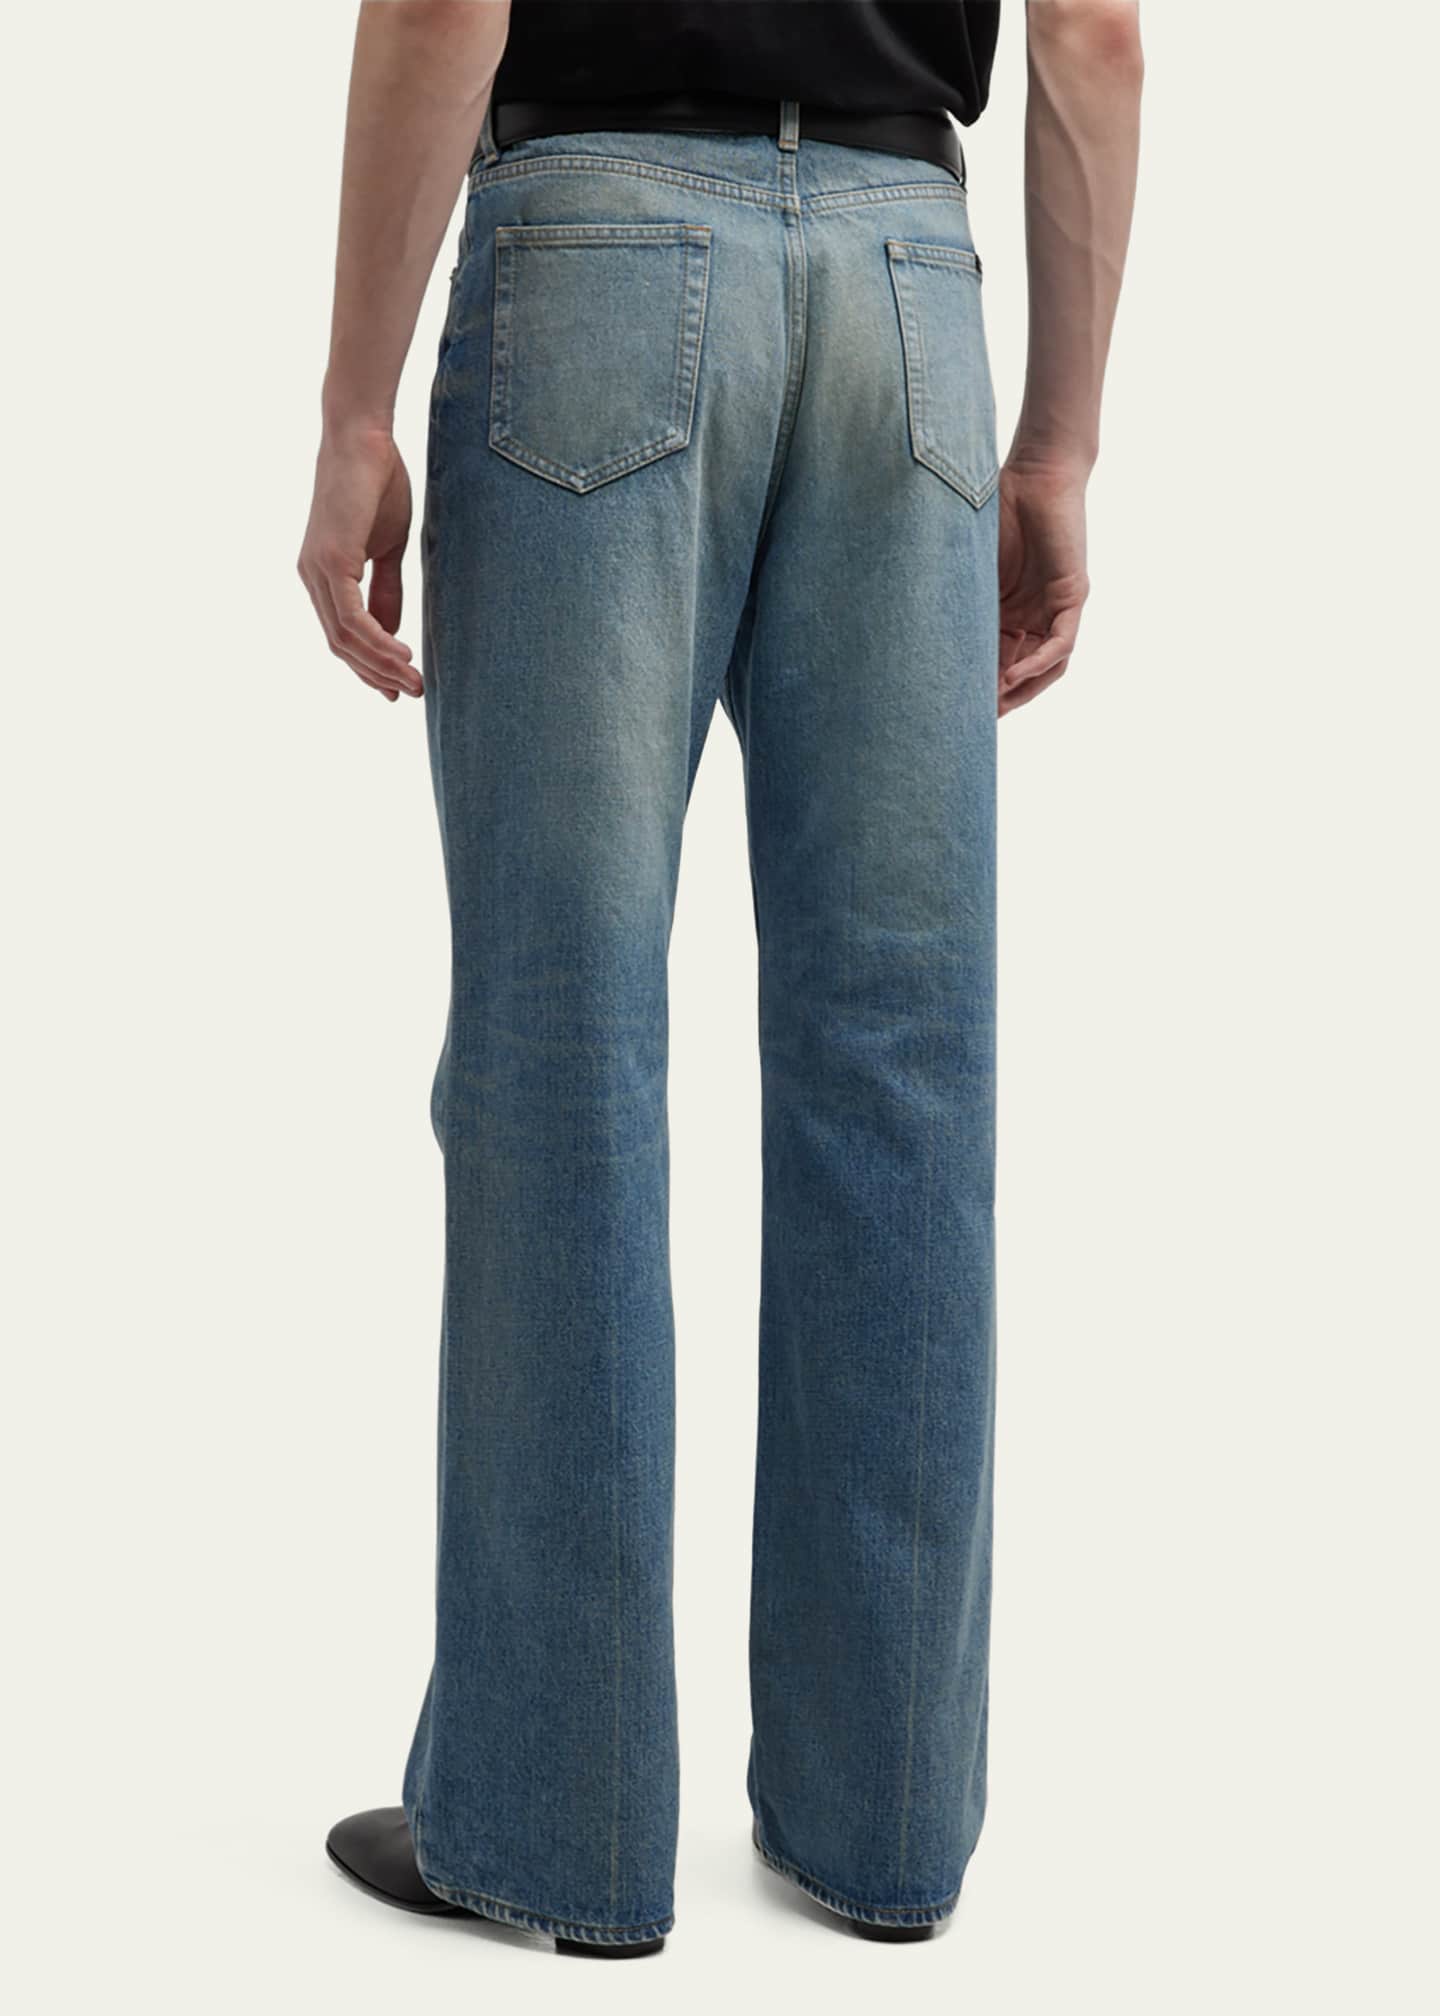 Serge 70s high-rise straight jeans in blue - Saint Laurent